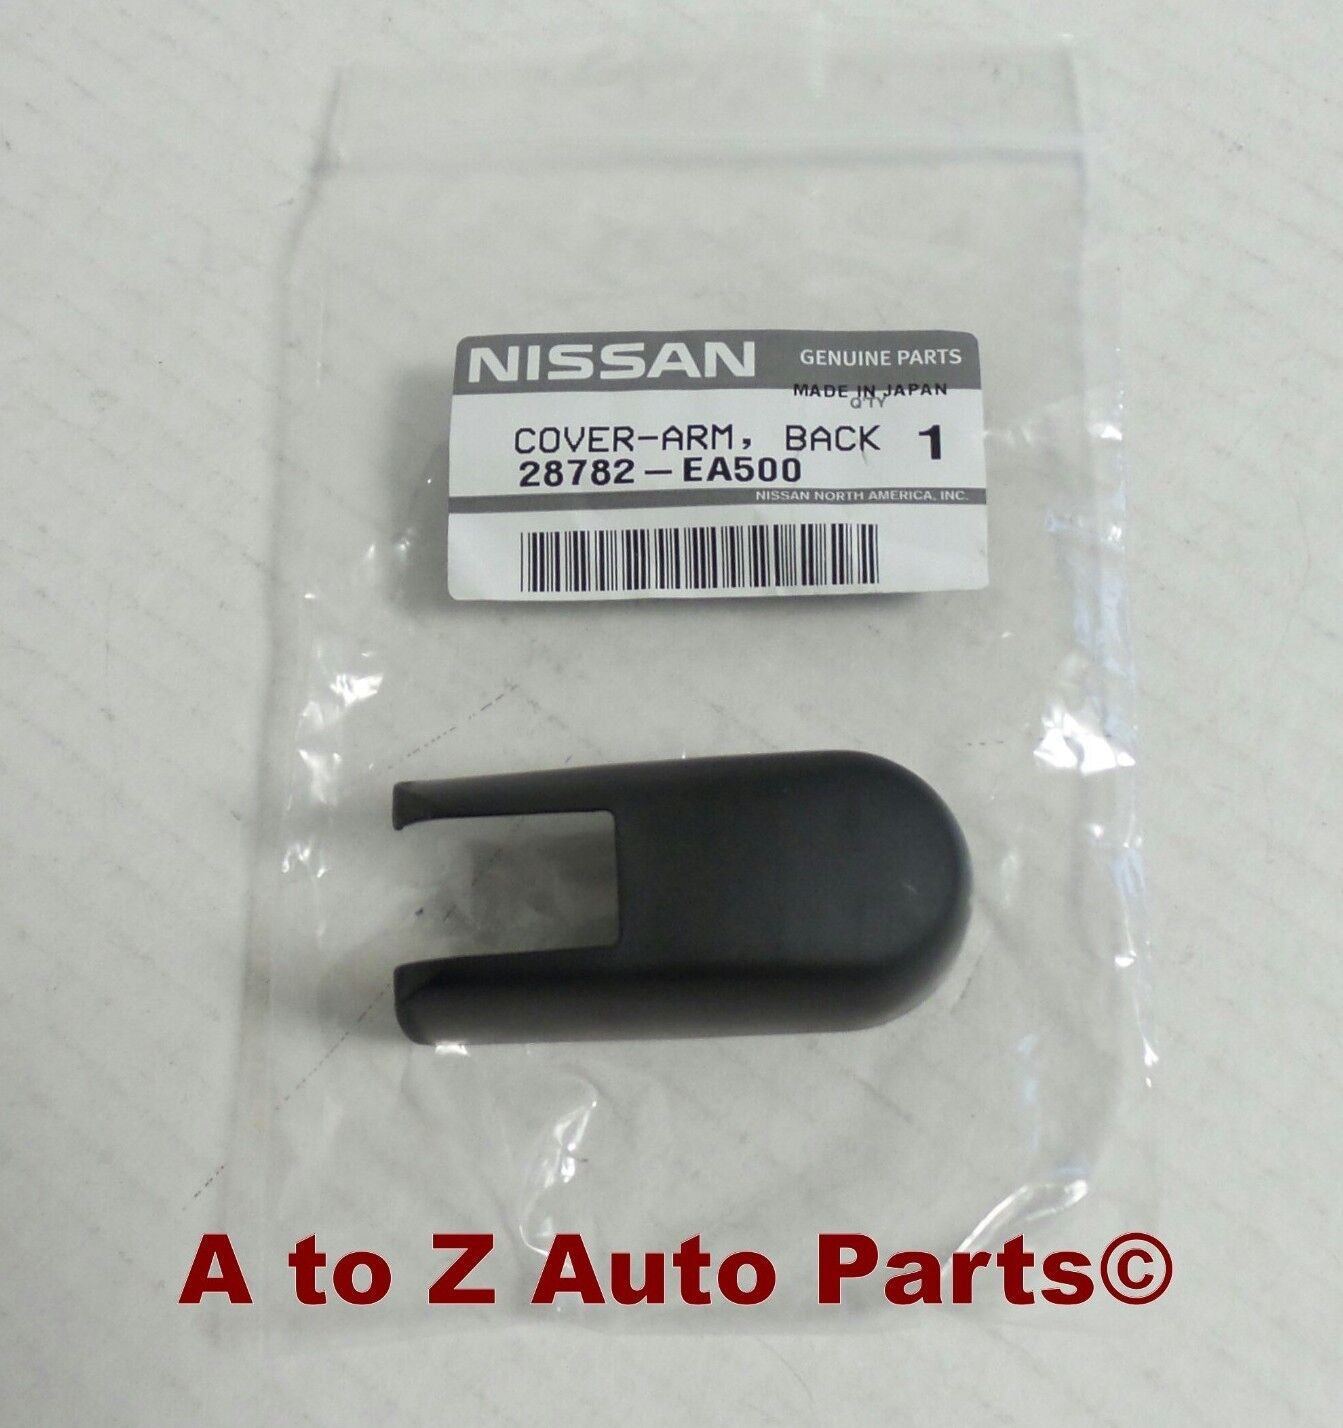 NEW 2005-2012 Nissan Pathfinder REAR Wiper Arm Cap or Cover, OEM 